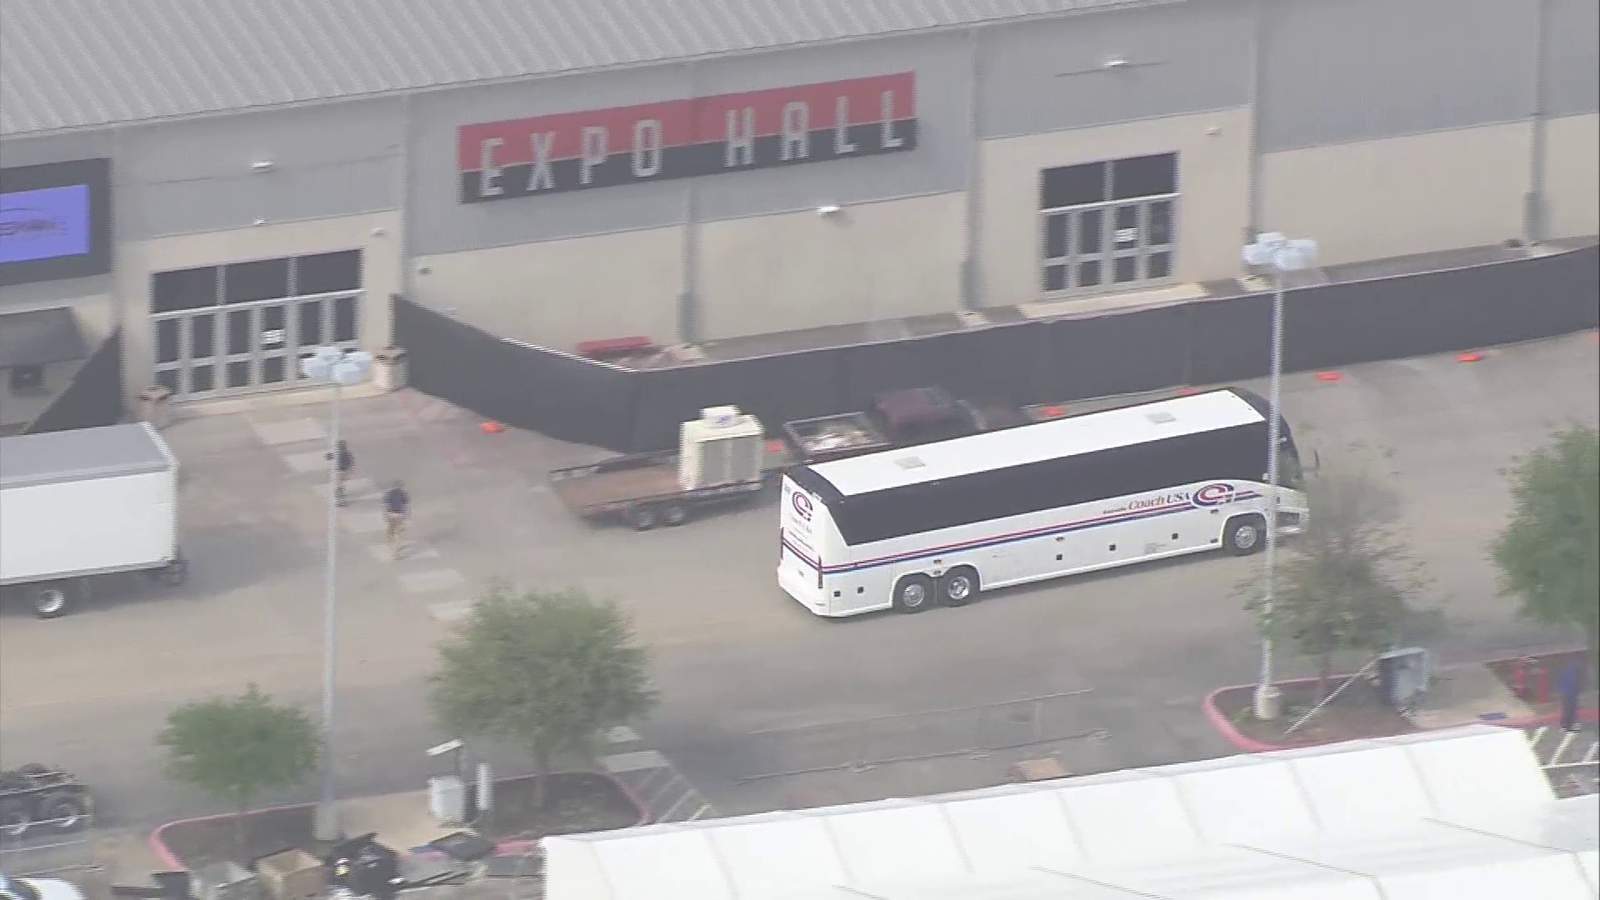 WATCH: Buses transporting migrant children from Rio Grande Valley arrive at Freeman Coliseum Expo Halls